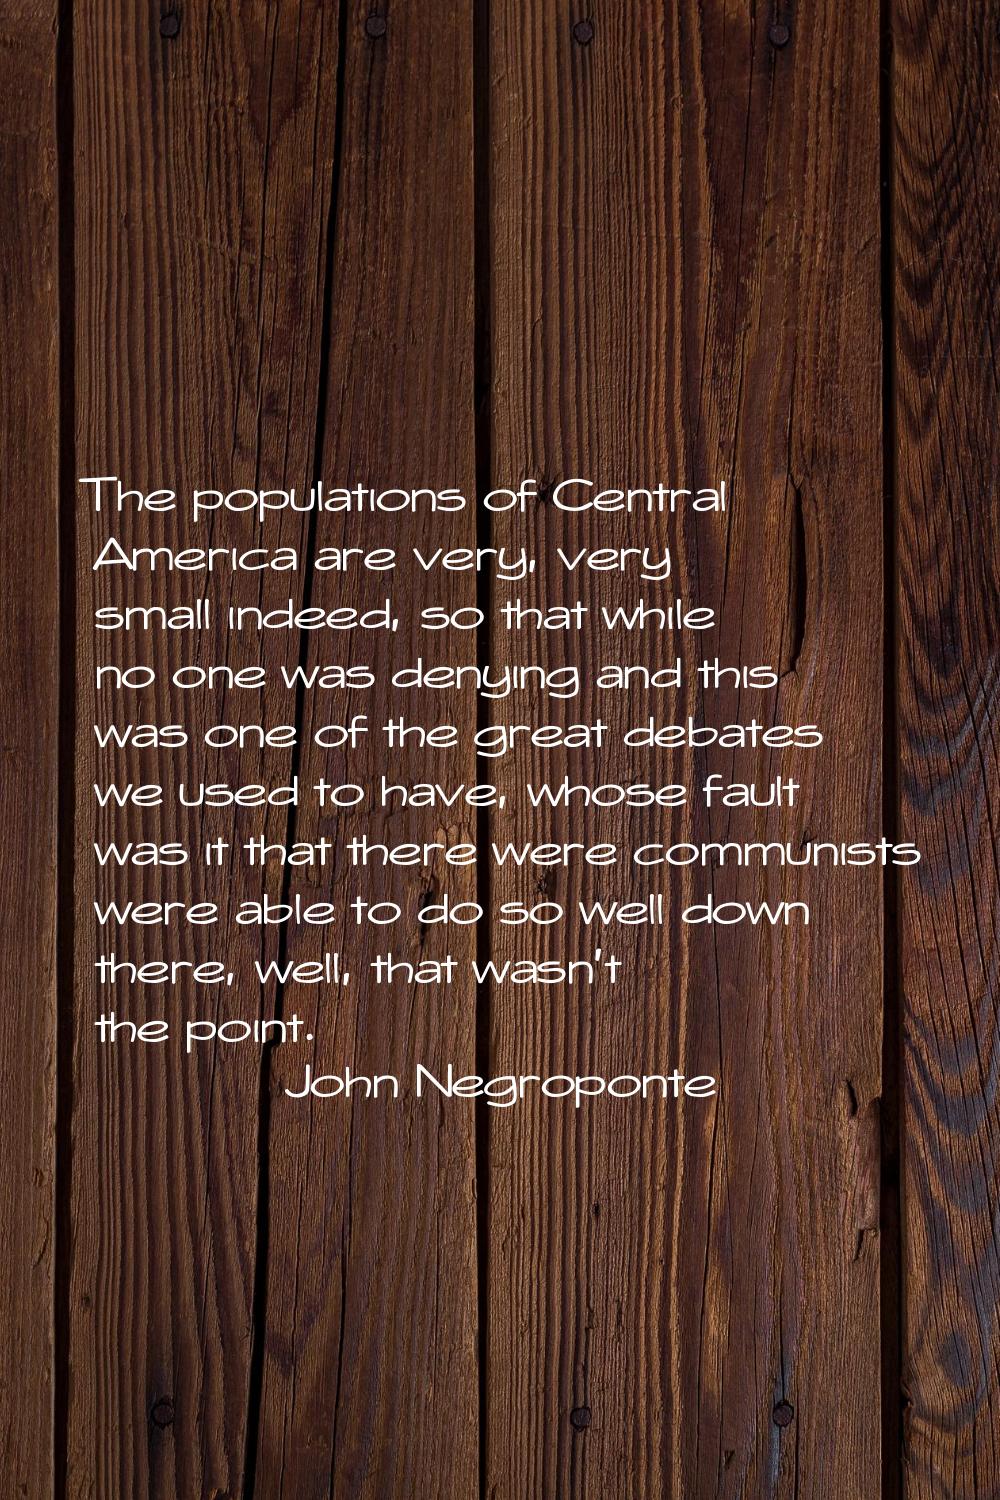 The populations of Central America are very, very small indeed, so that while no one was denying an